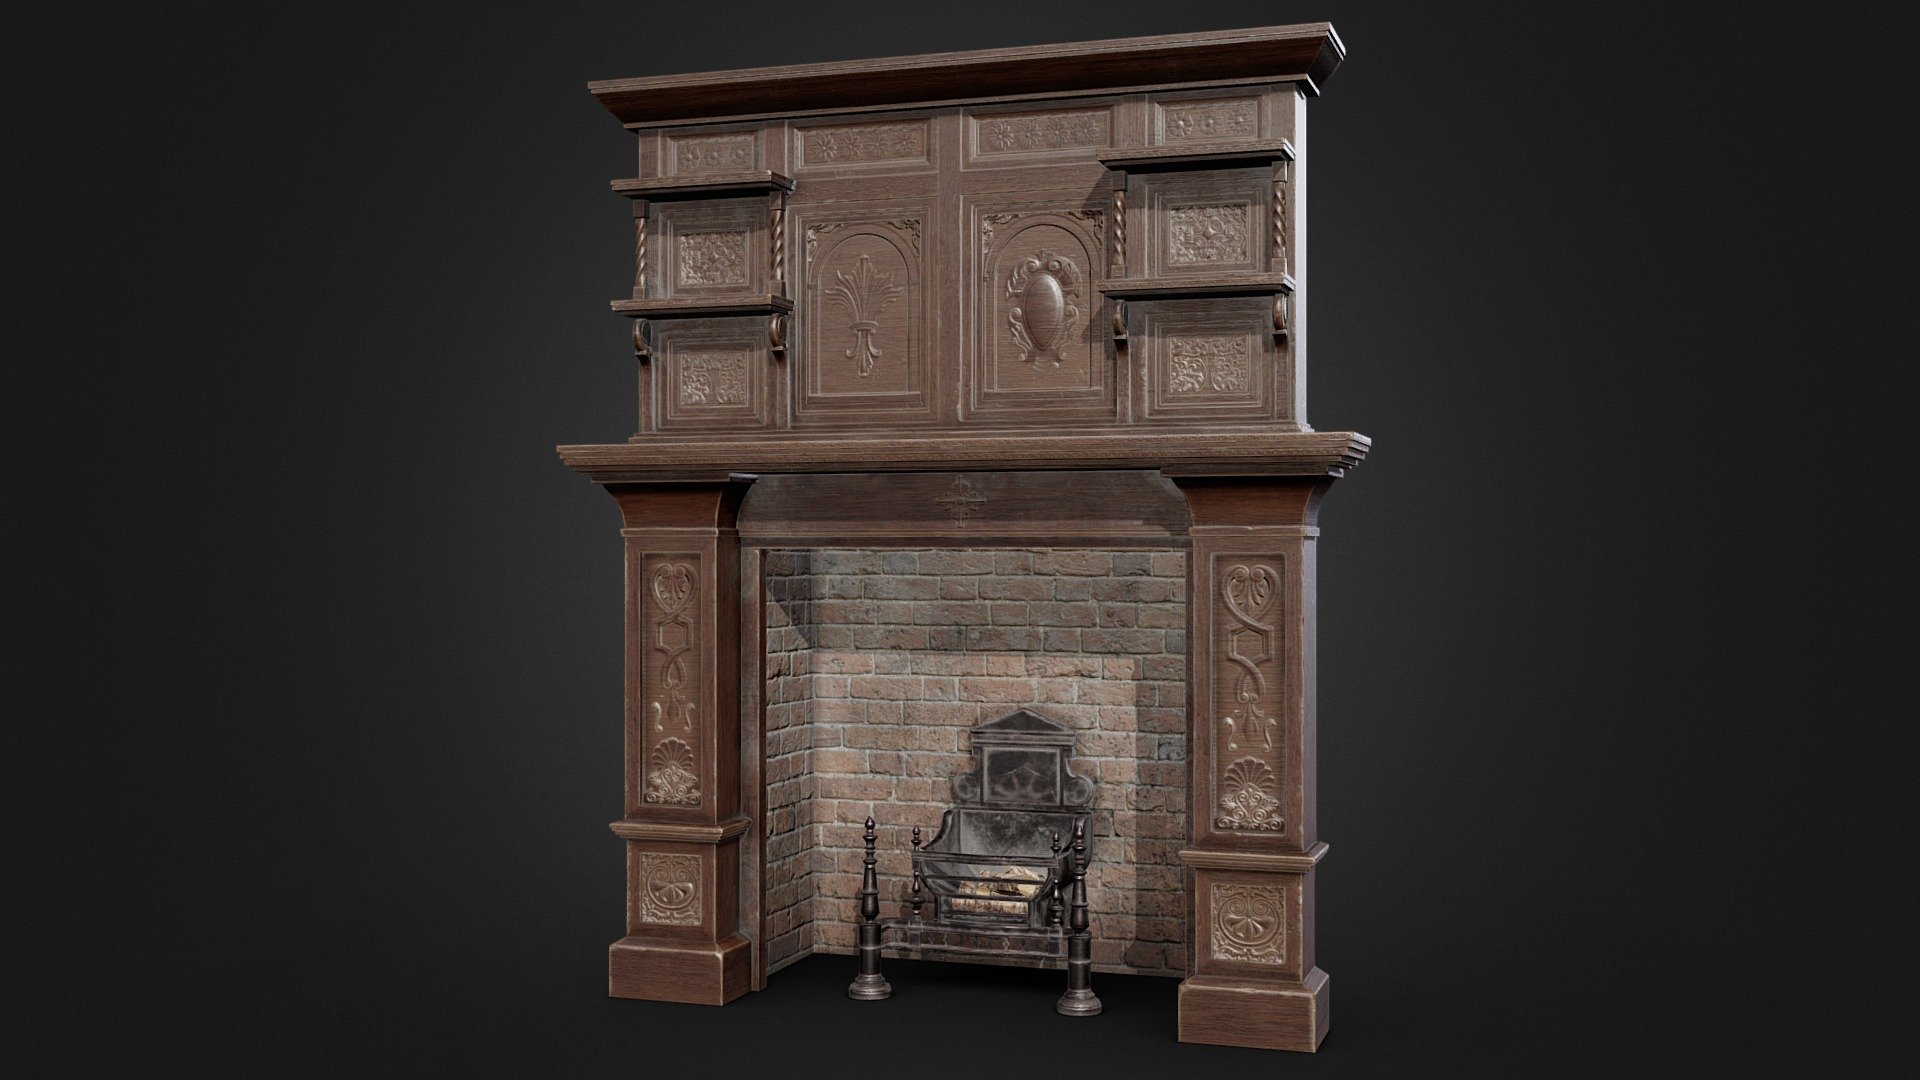 This game-ready model features a Victorian inspired fireplace. This model is included in Victorian Room on Sketchfab.

Features




The model includes a grand Victorian-era fireplace and a grate with logs.

The model is low-poly and optimised for use in game, VR, archviz, and visual production.

The model has clean topology, grouped and named appropriately, and unwrapped with no overlaps.

9,998 triangles; 5,857 vertices.

Modelled in Blender and textured in Substance Painter.

Textures

Model has 1 PBR texture set. Textures are in .png at 2048x2048 and includes: Base Colour, Roughness, Metallic, Normal - Victorian Fireplace - Buy Royalty Free 3D model by Matthew Collings (@mtcollings) 3d model